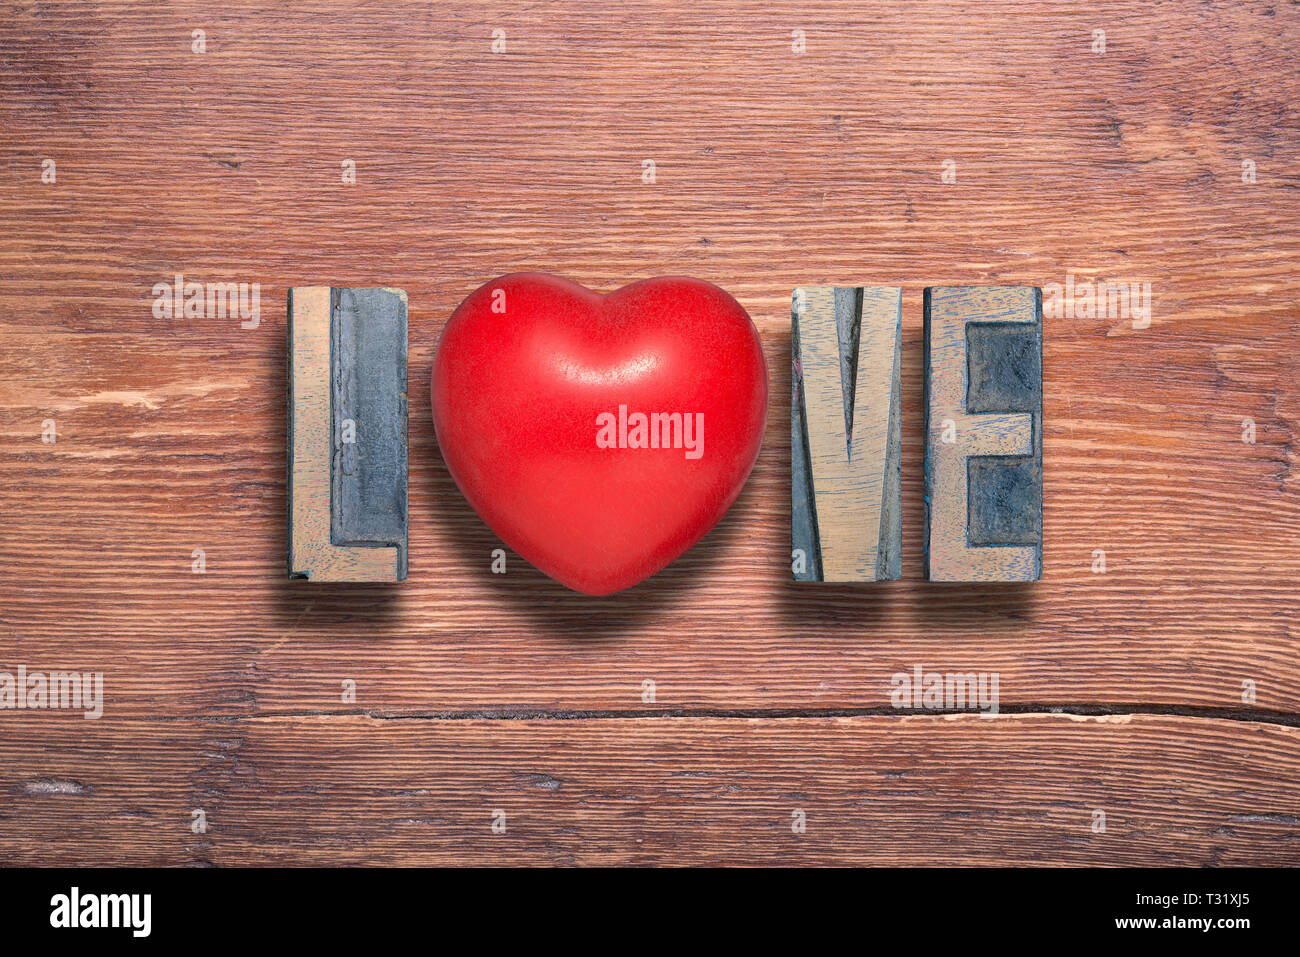 love word combined on vintage varnished wooden surface with heart symbol inside Stock Photo